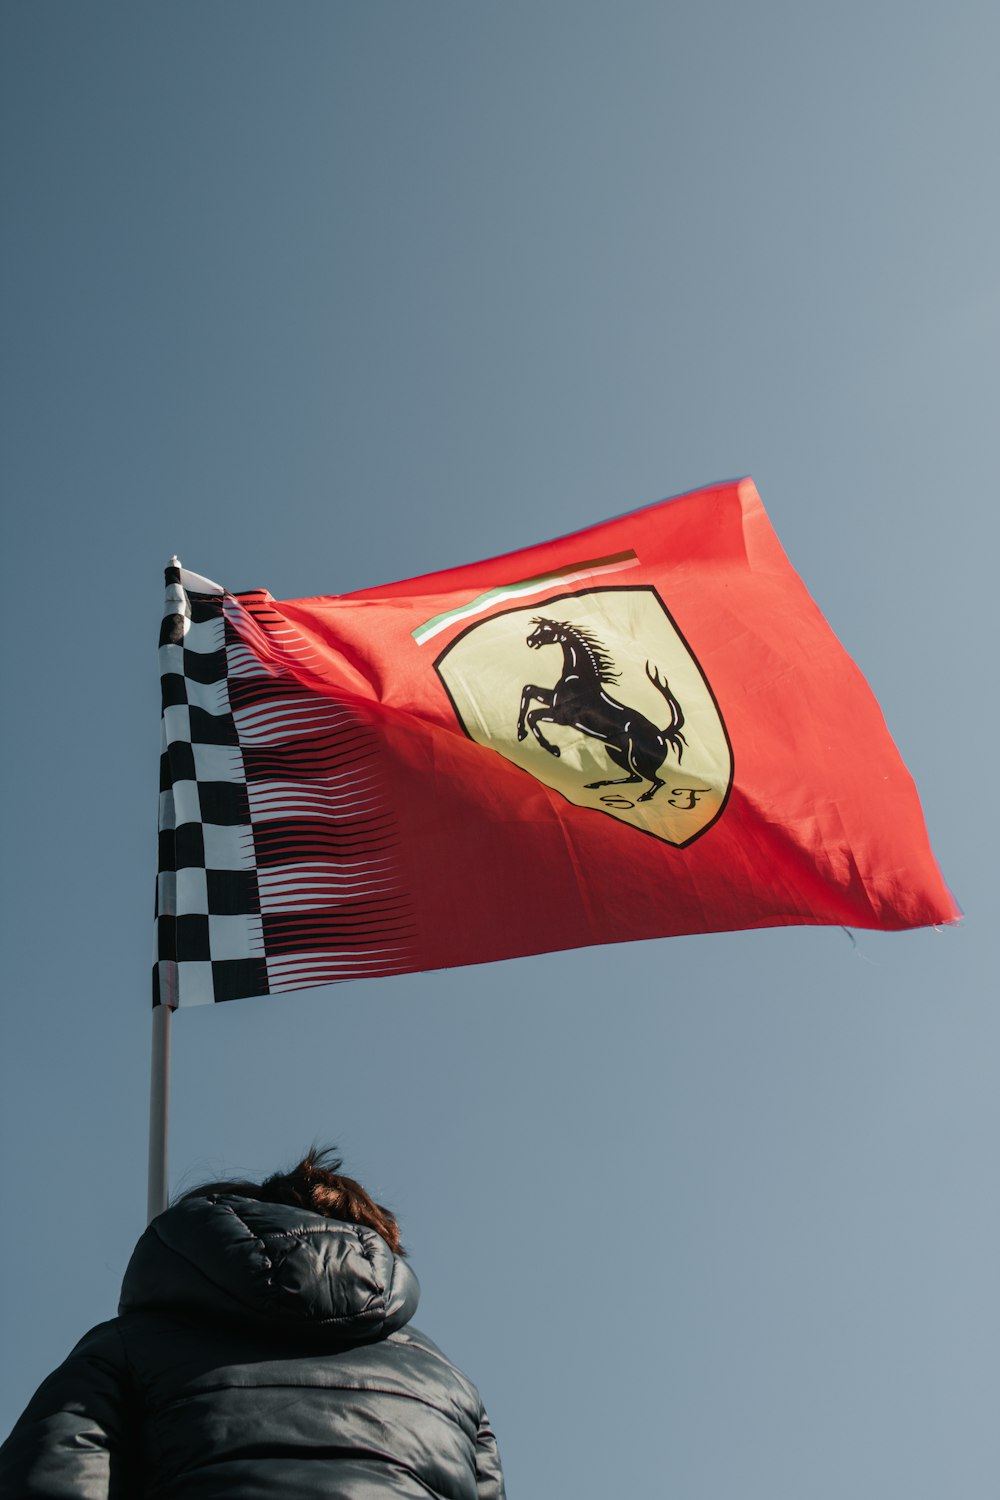 a red flag with a black and white horse on it